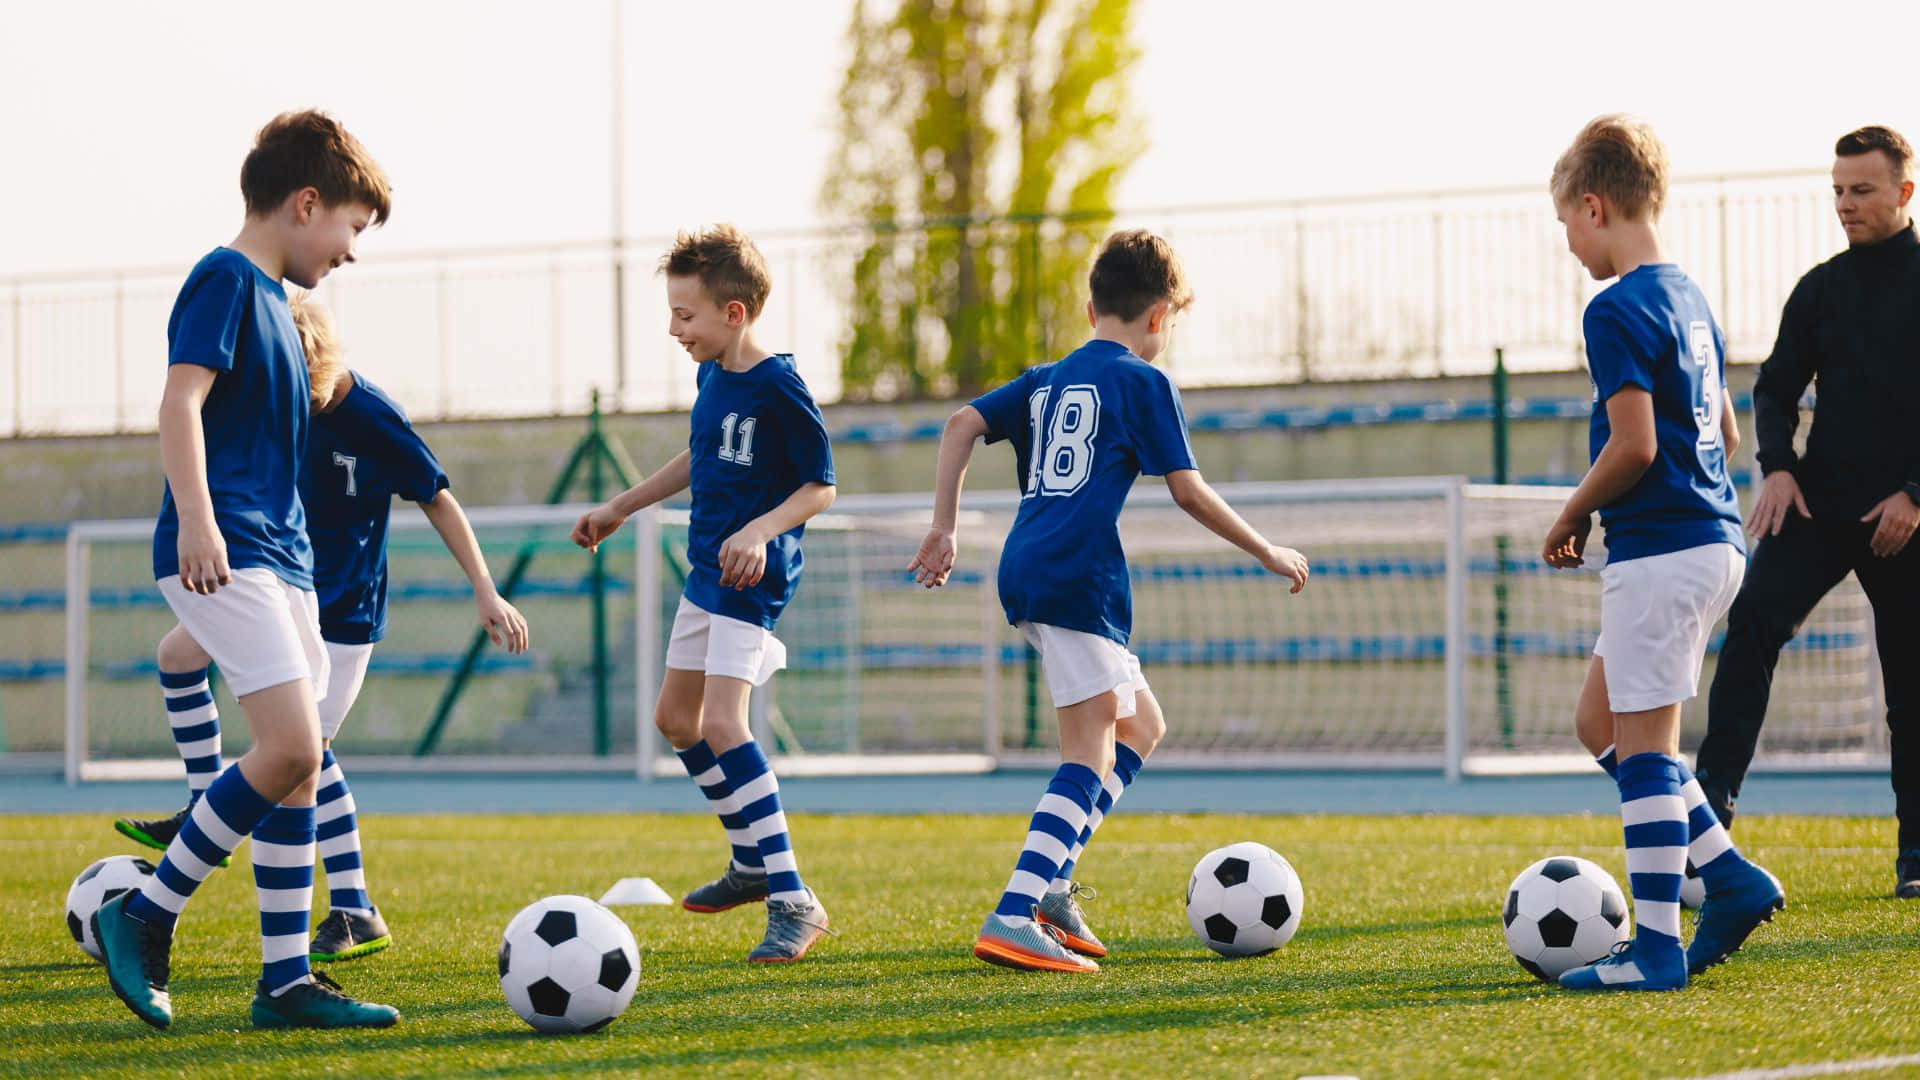 Boys Playing Soccer Sports Background